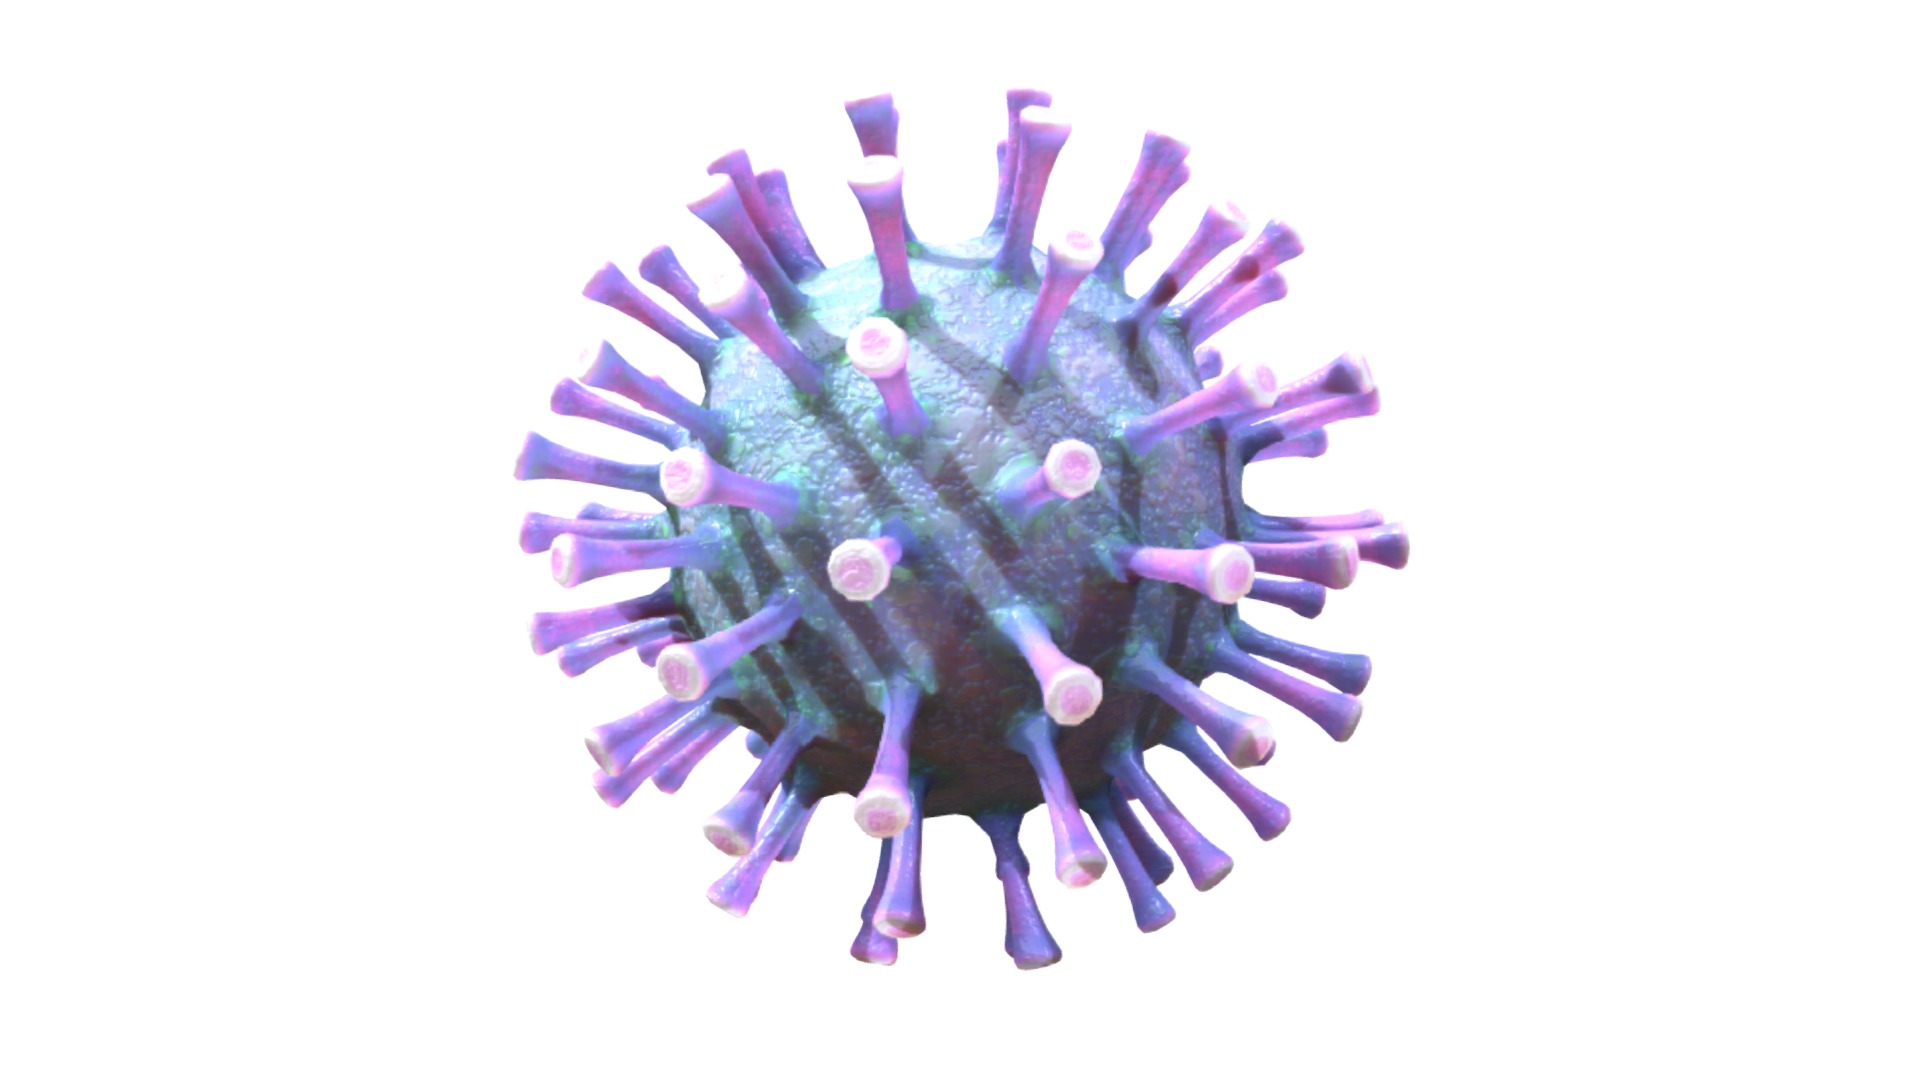 3D model Corona Virus Covid 19 - This is a 3D model of the Corona Virus Covid 19. The 3D model is about a purple flower with many petals.